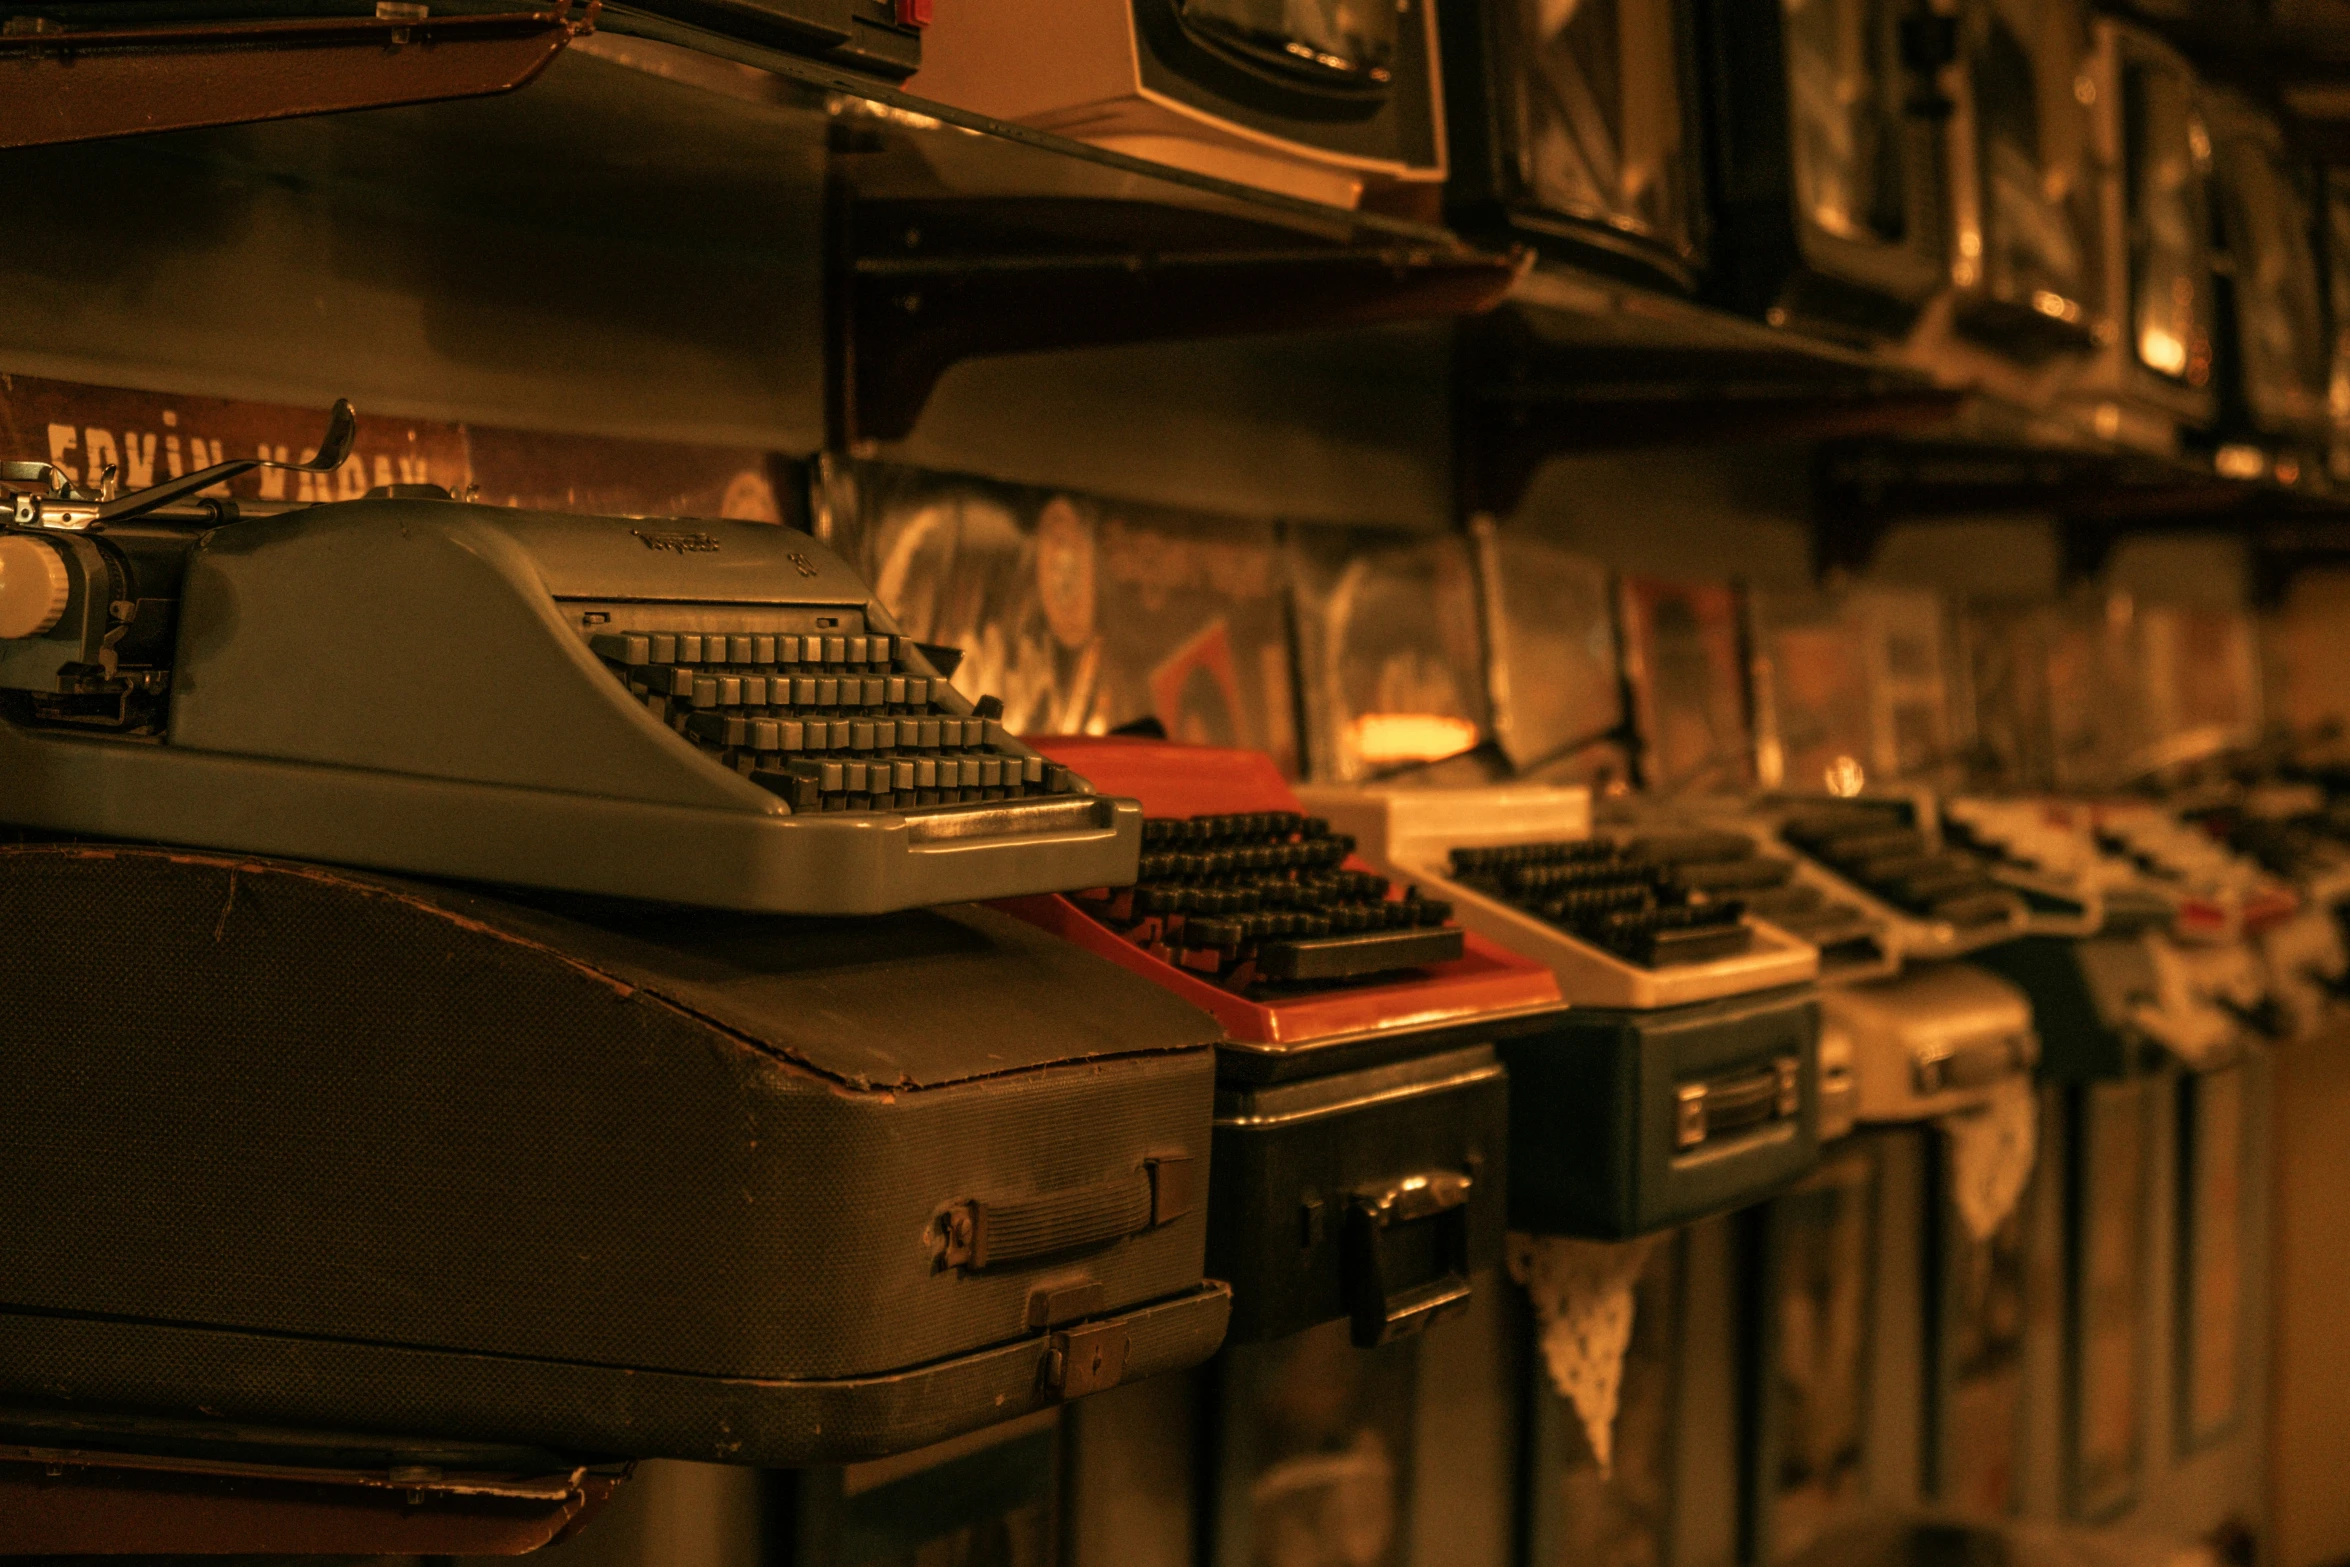 an old typewriter sits on the wall next to other equipment